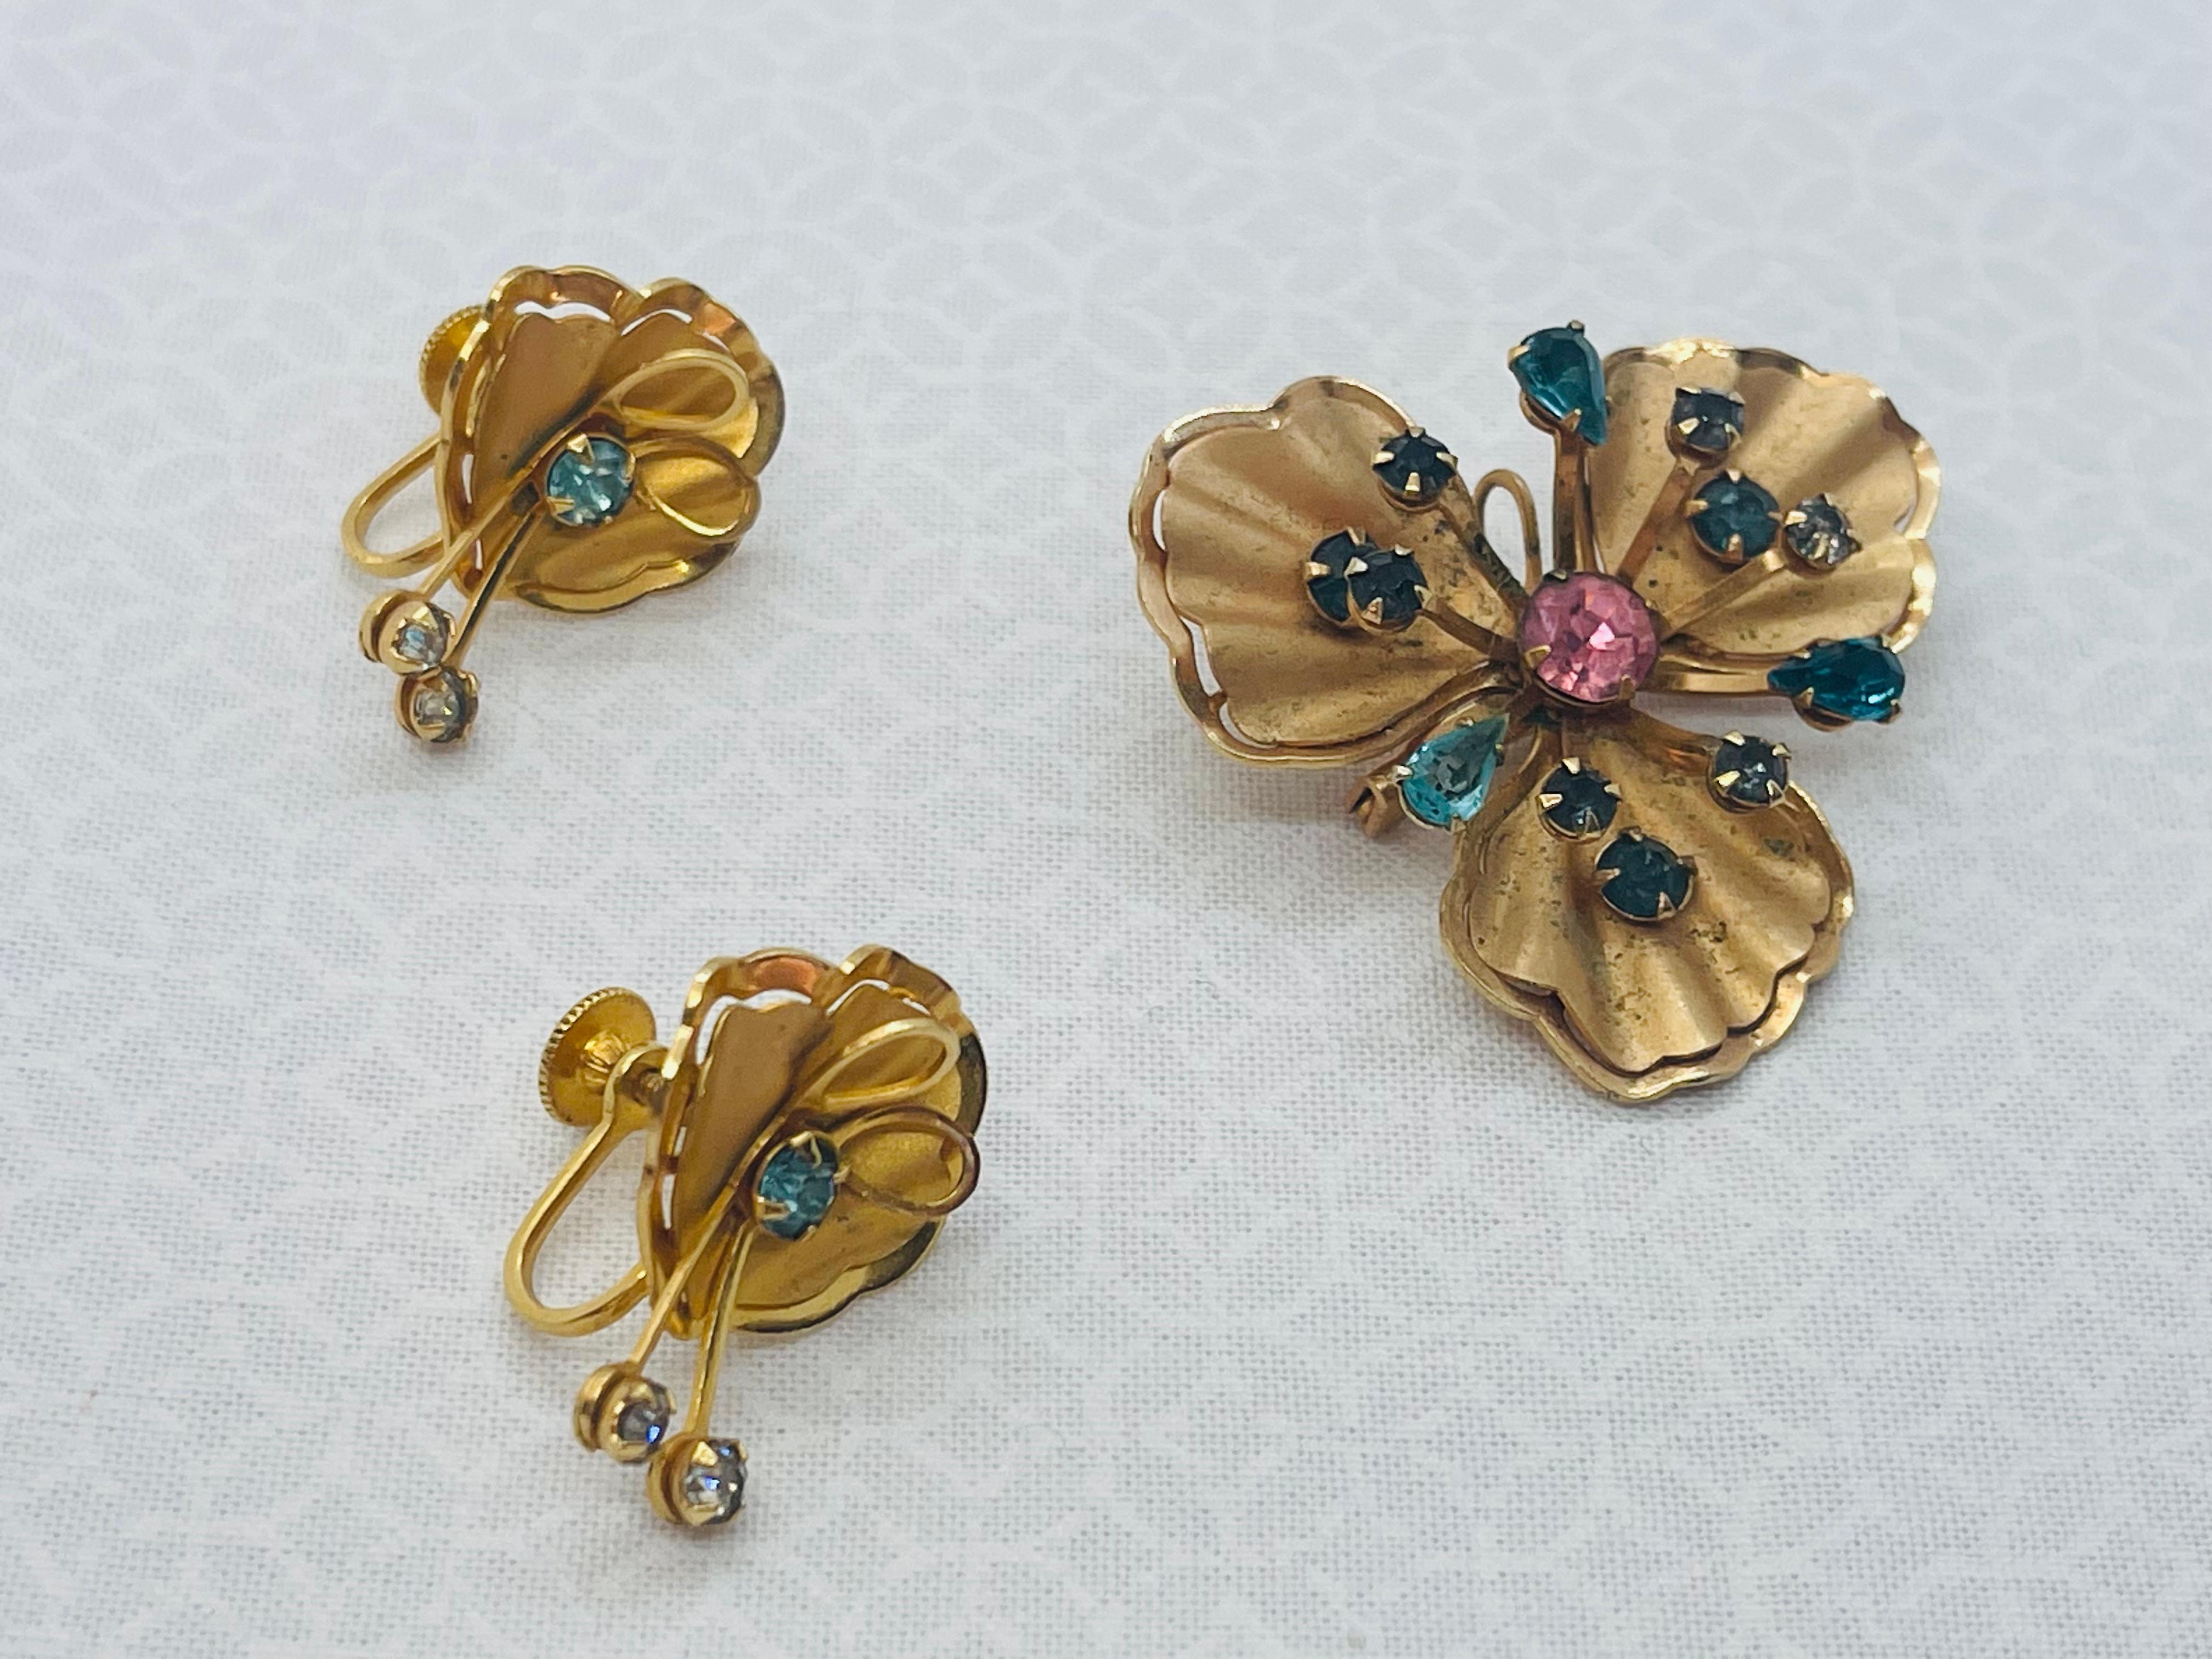 Bugbee & Niles Matching Earrings and Brooch Set Circa. 1955s - 1959 For Sale 8